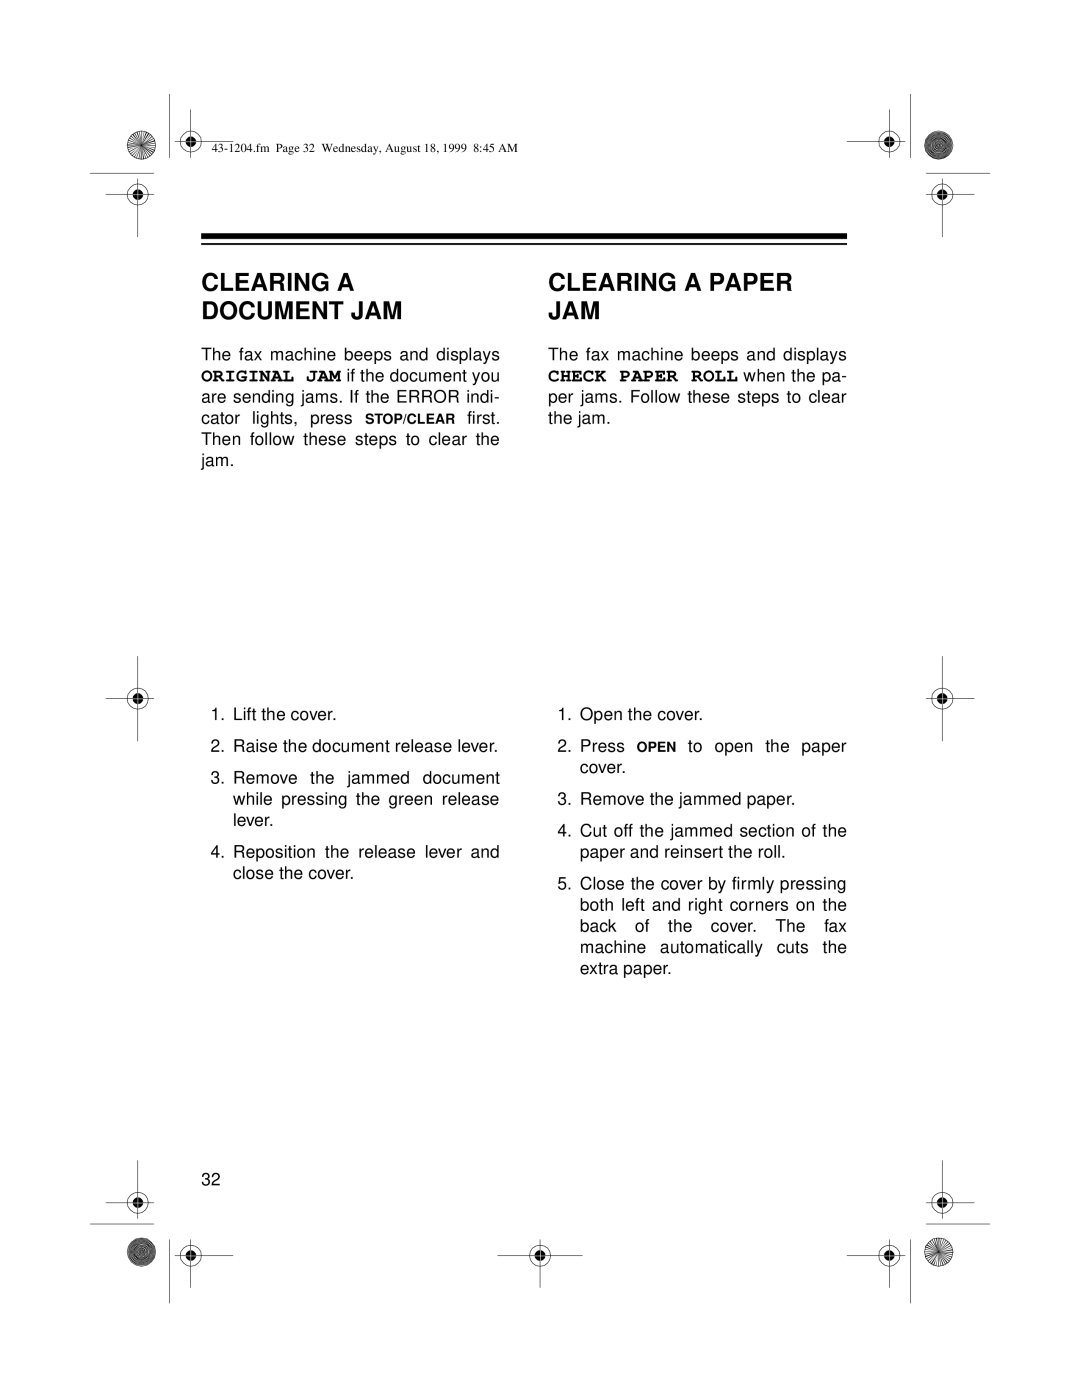 Radio Shack 43-1204 owner manual Clearing A Document Jam, Clearing A Paper Jam 